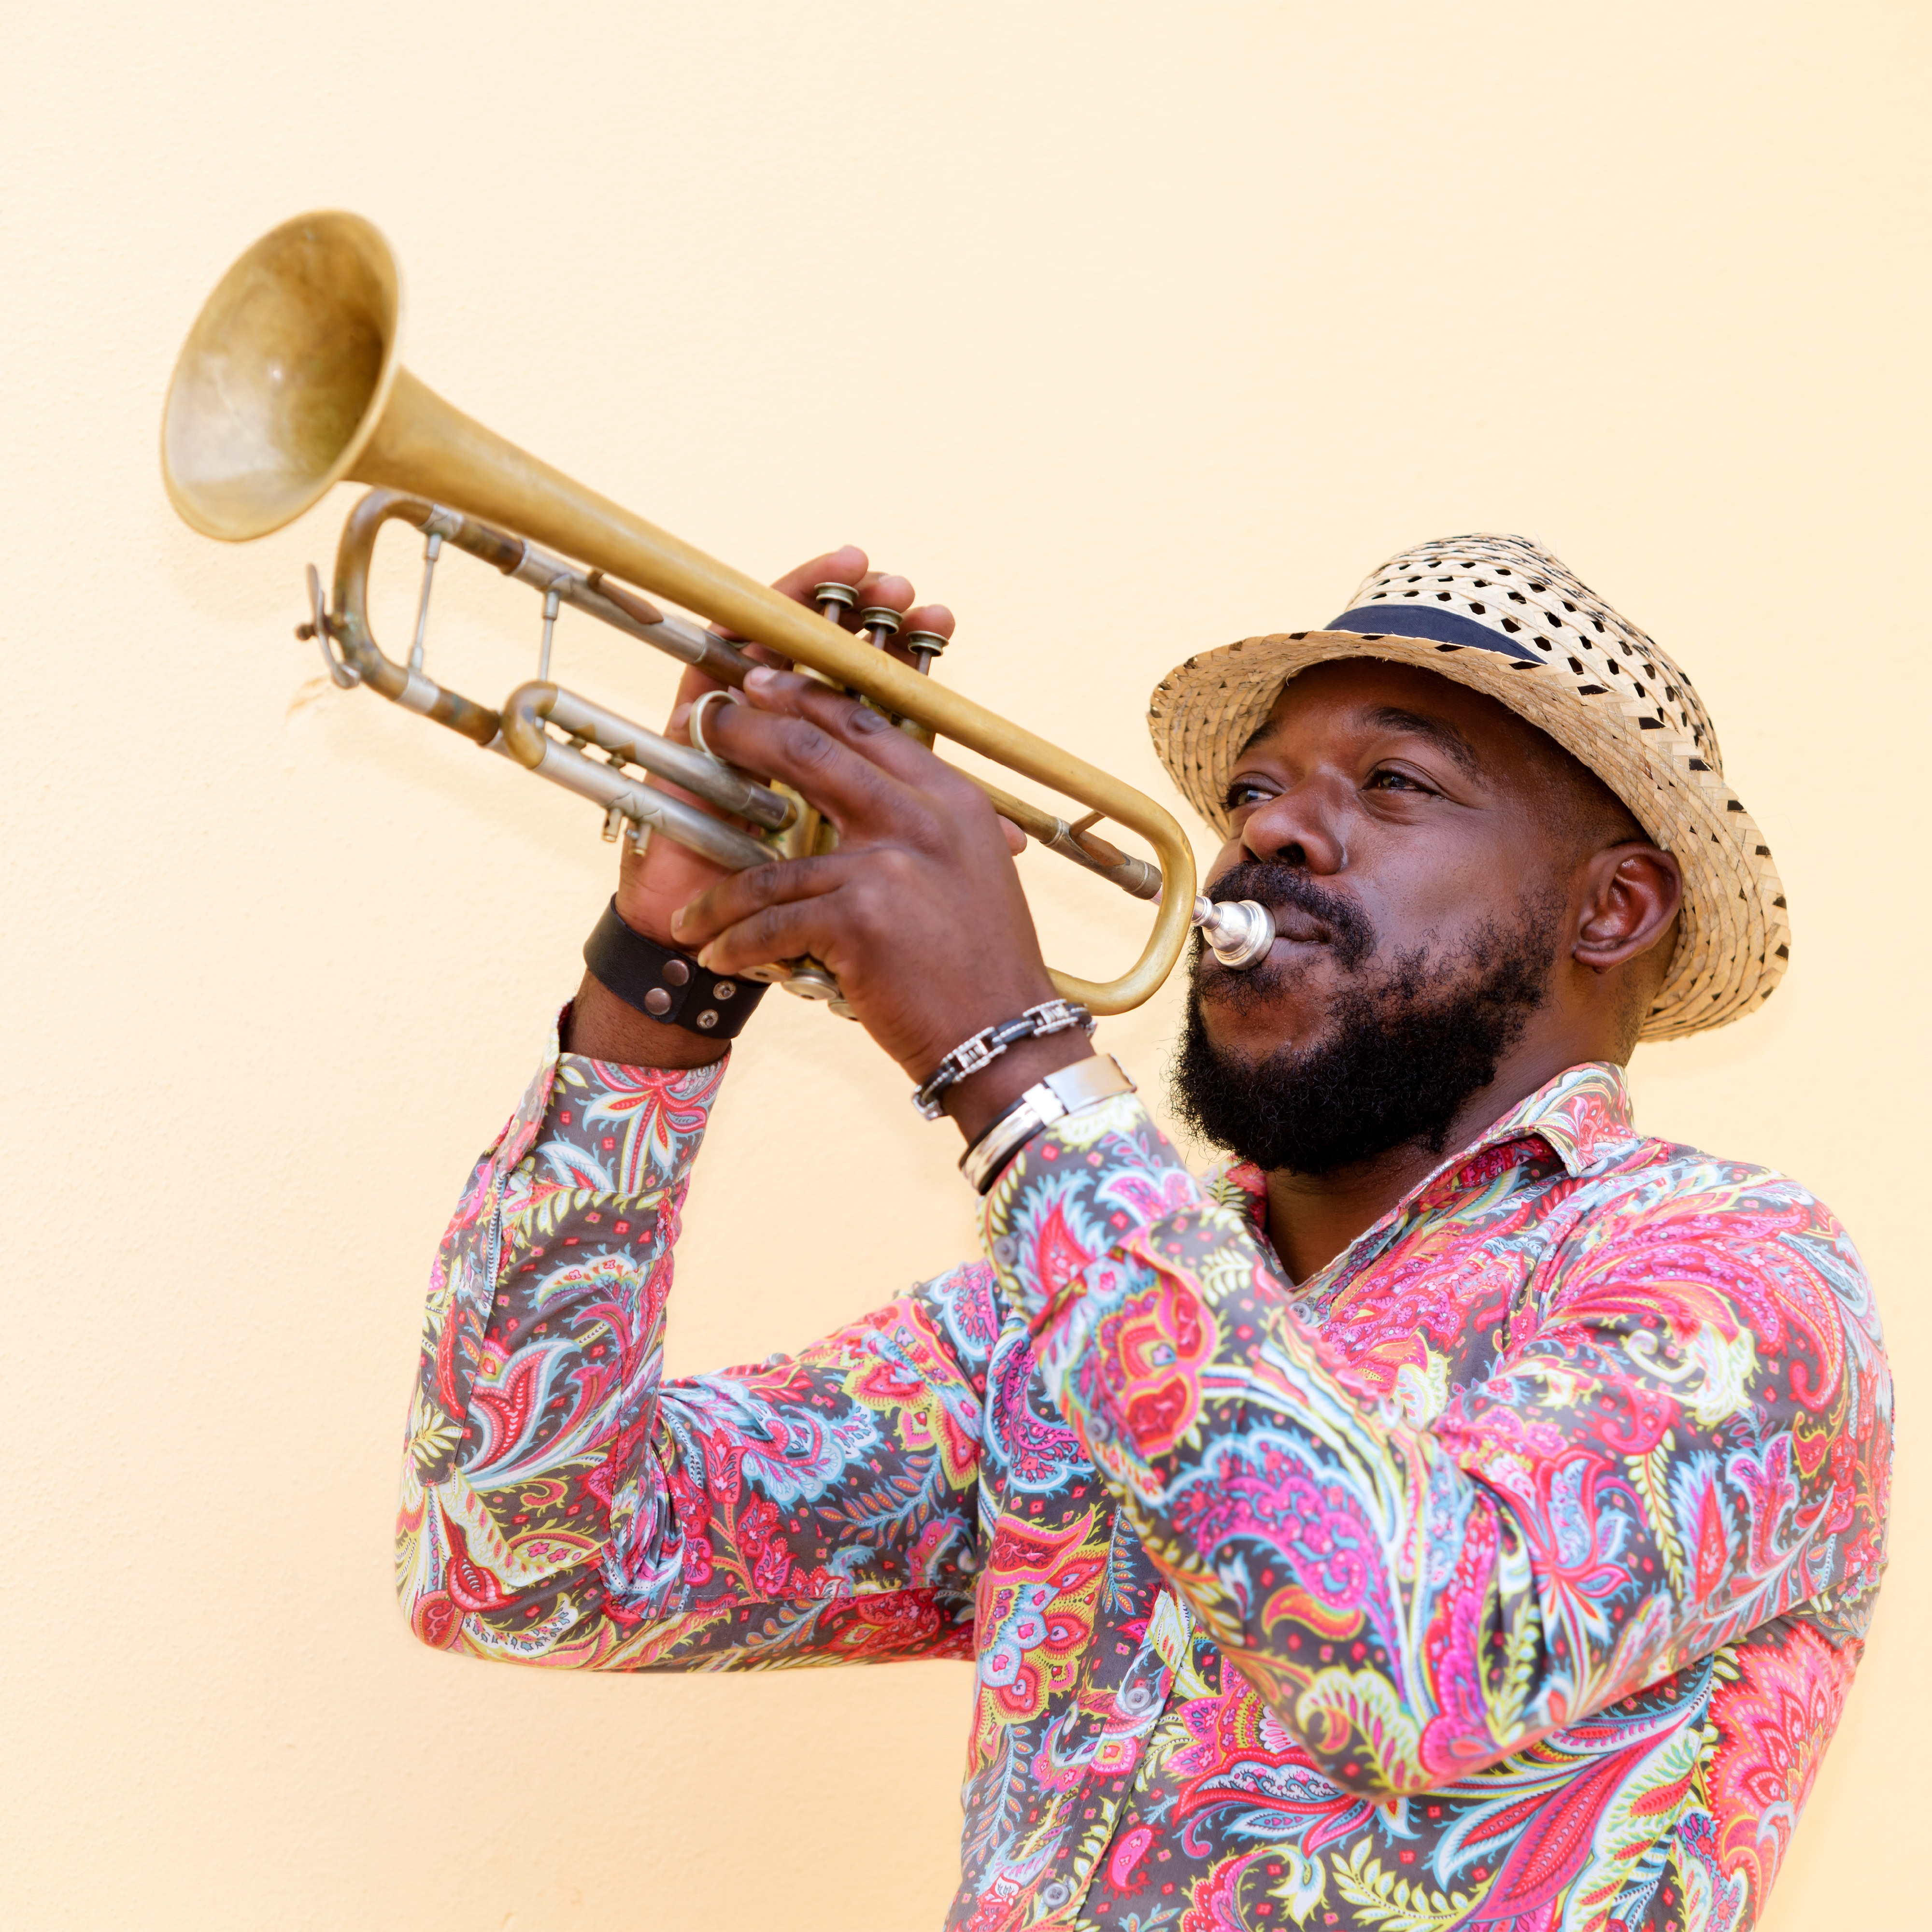 Musician playing trumpet